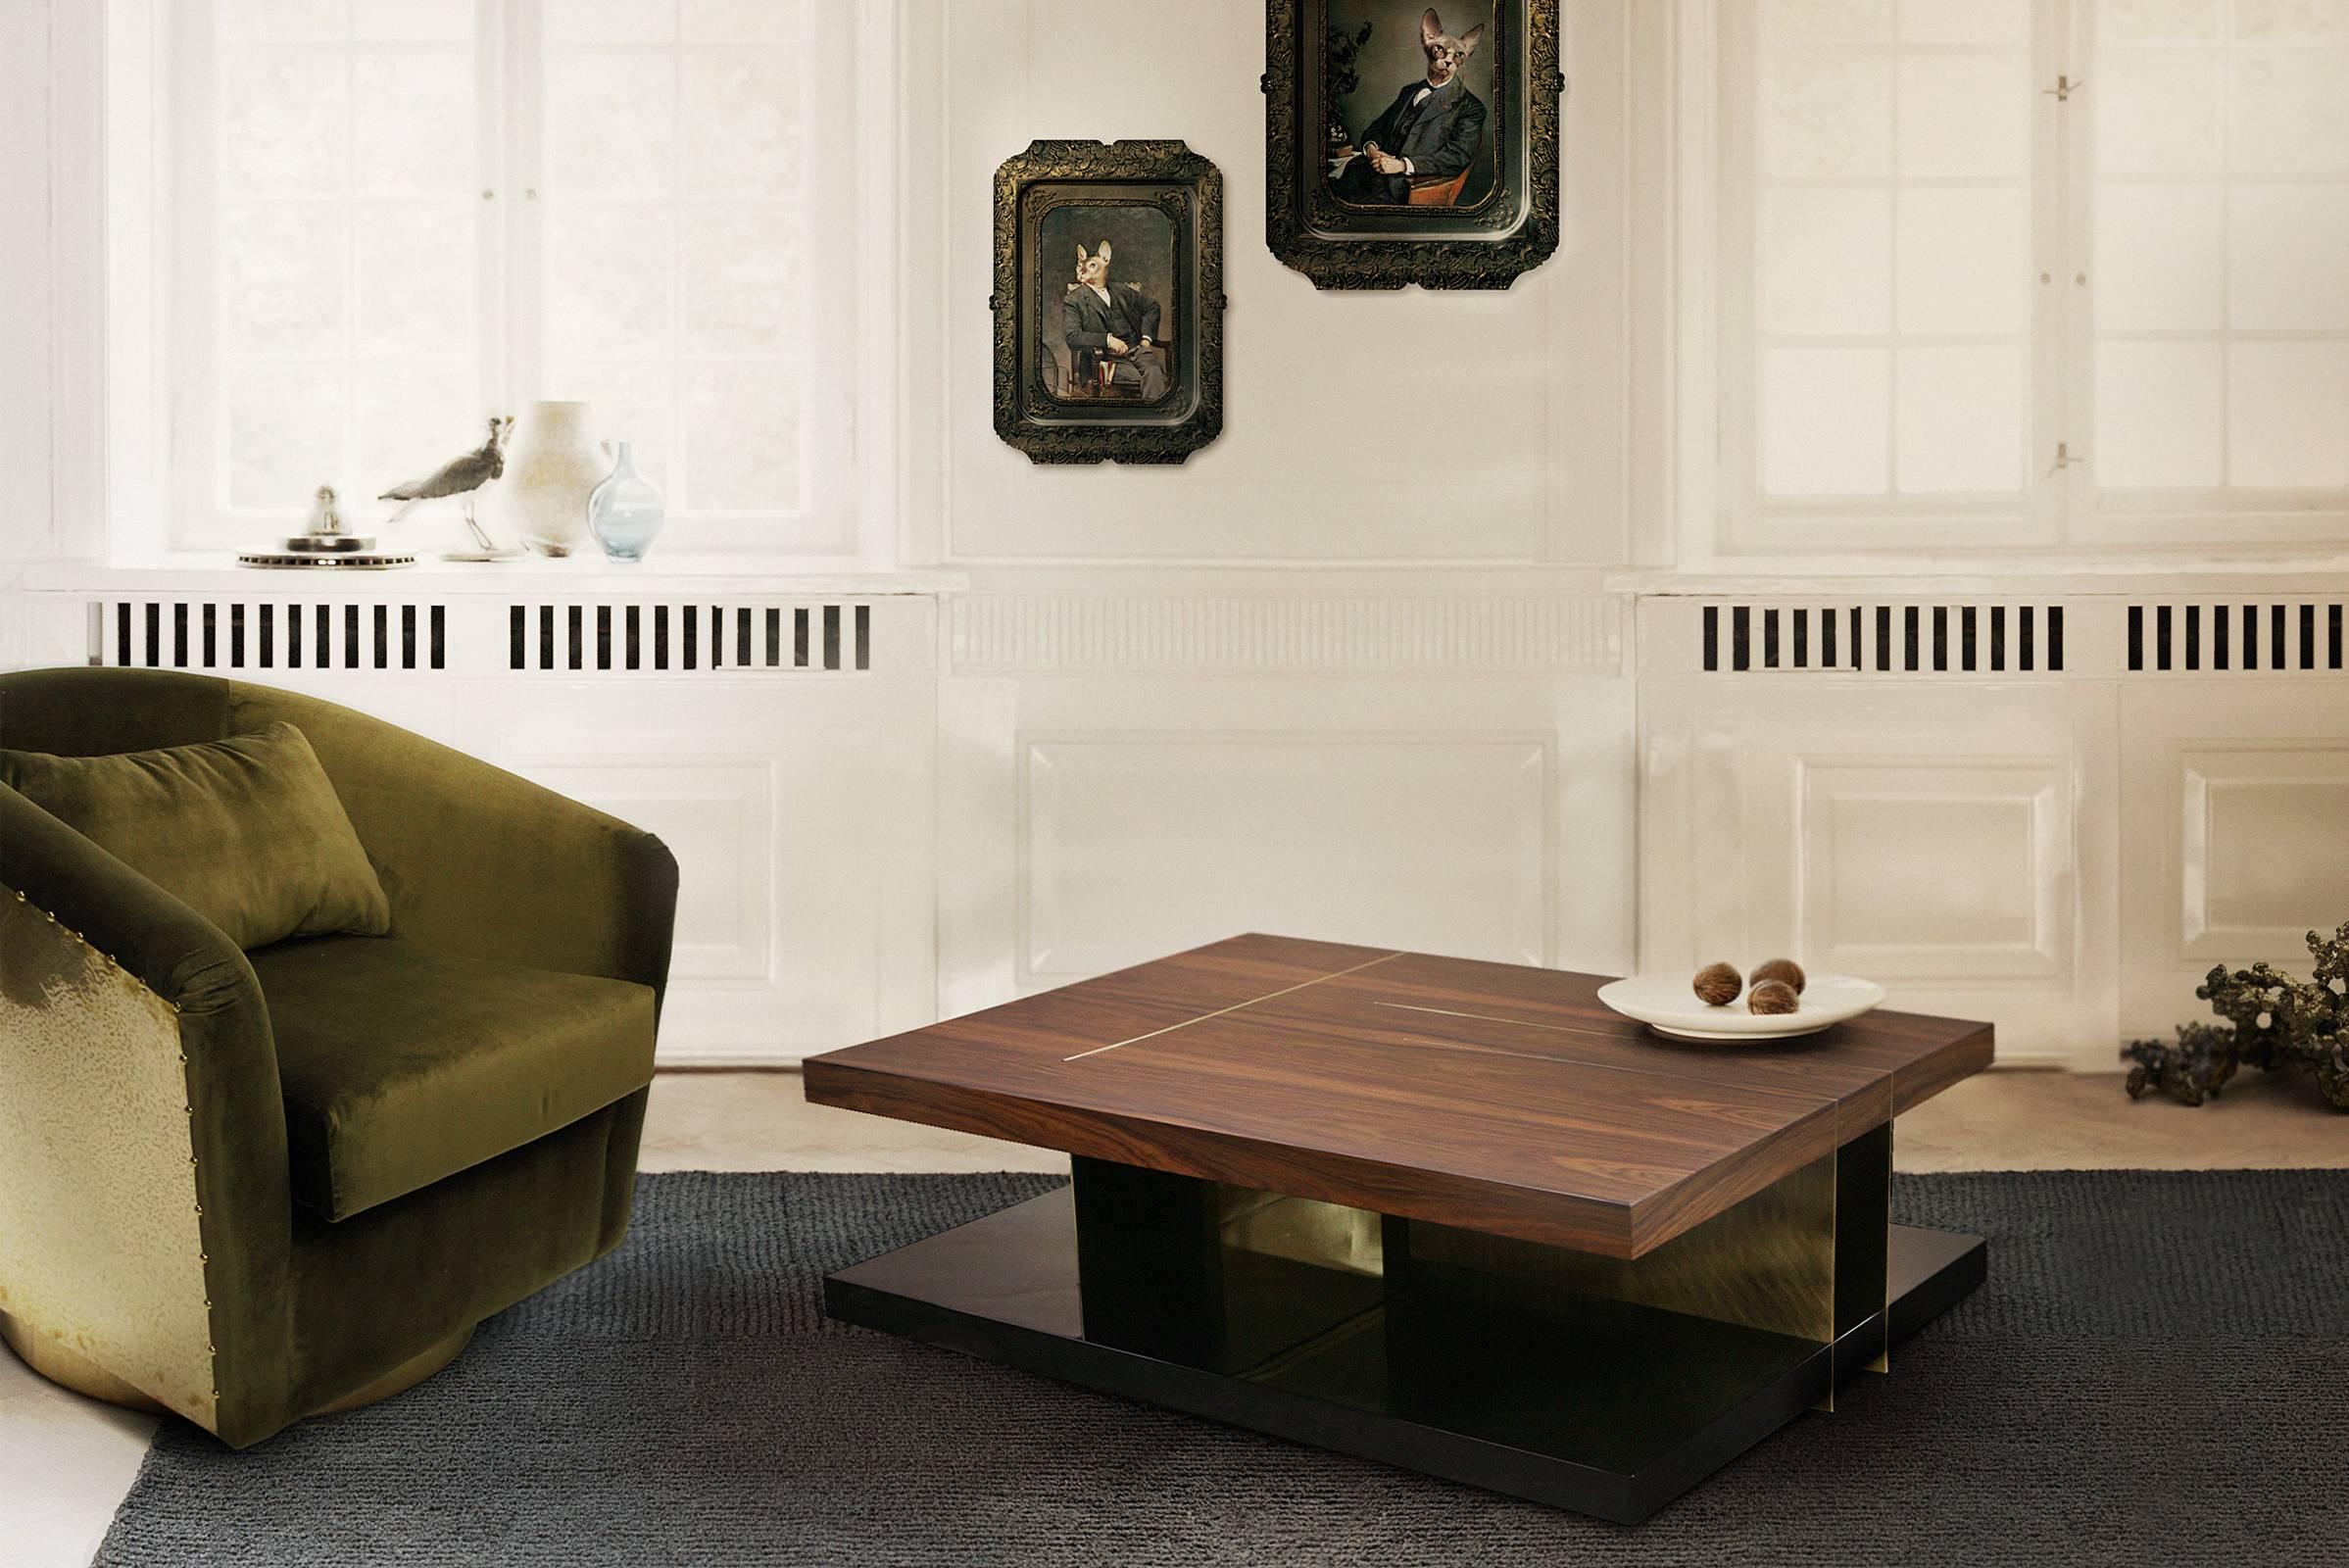 Portuguese Chloe Coffee Table with High Glossy Lacquer, Veneer Wood and Brass For Sale